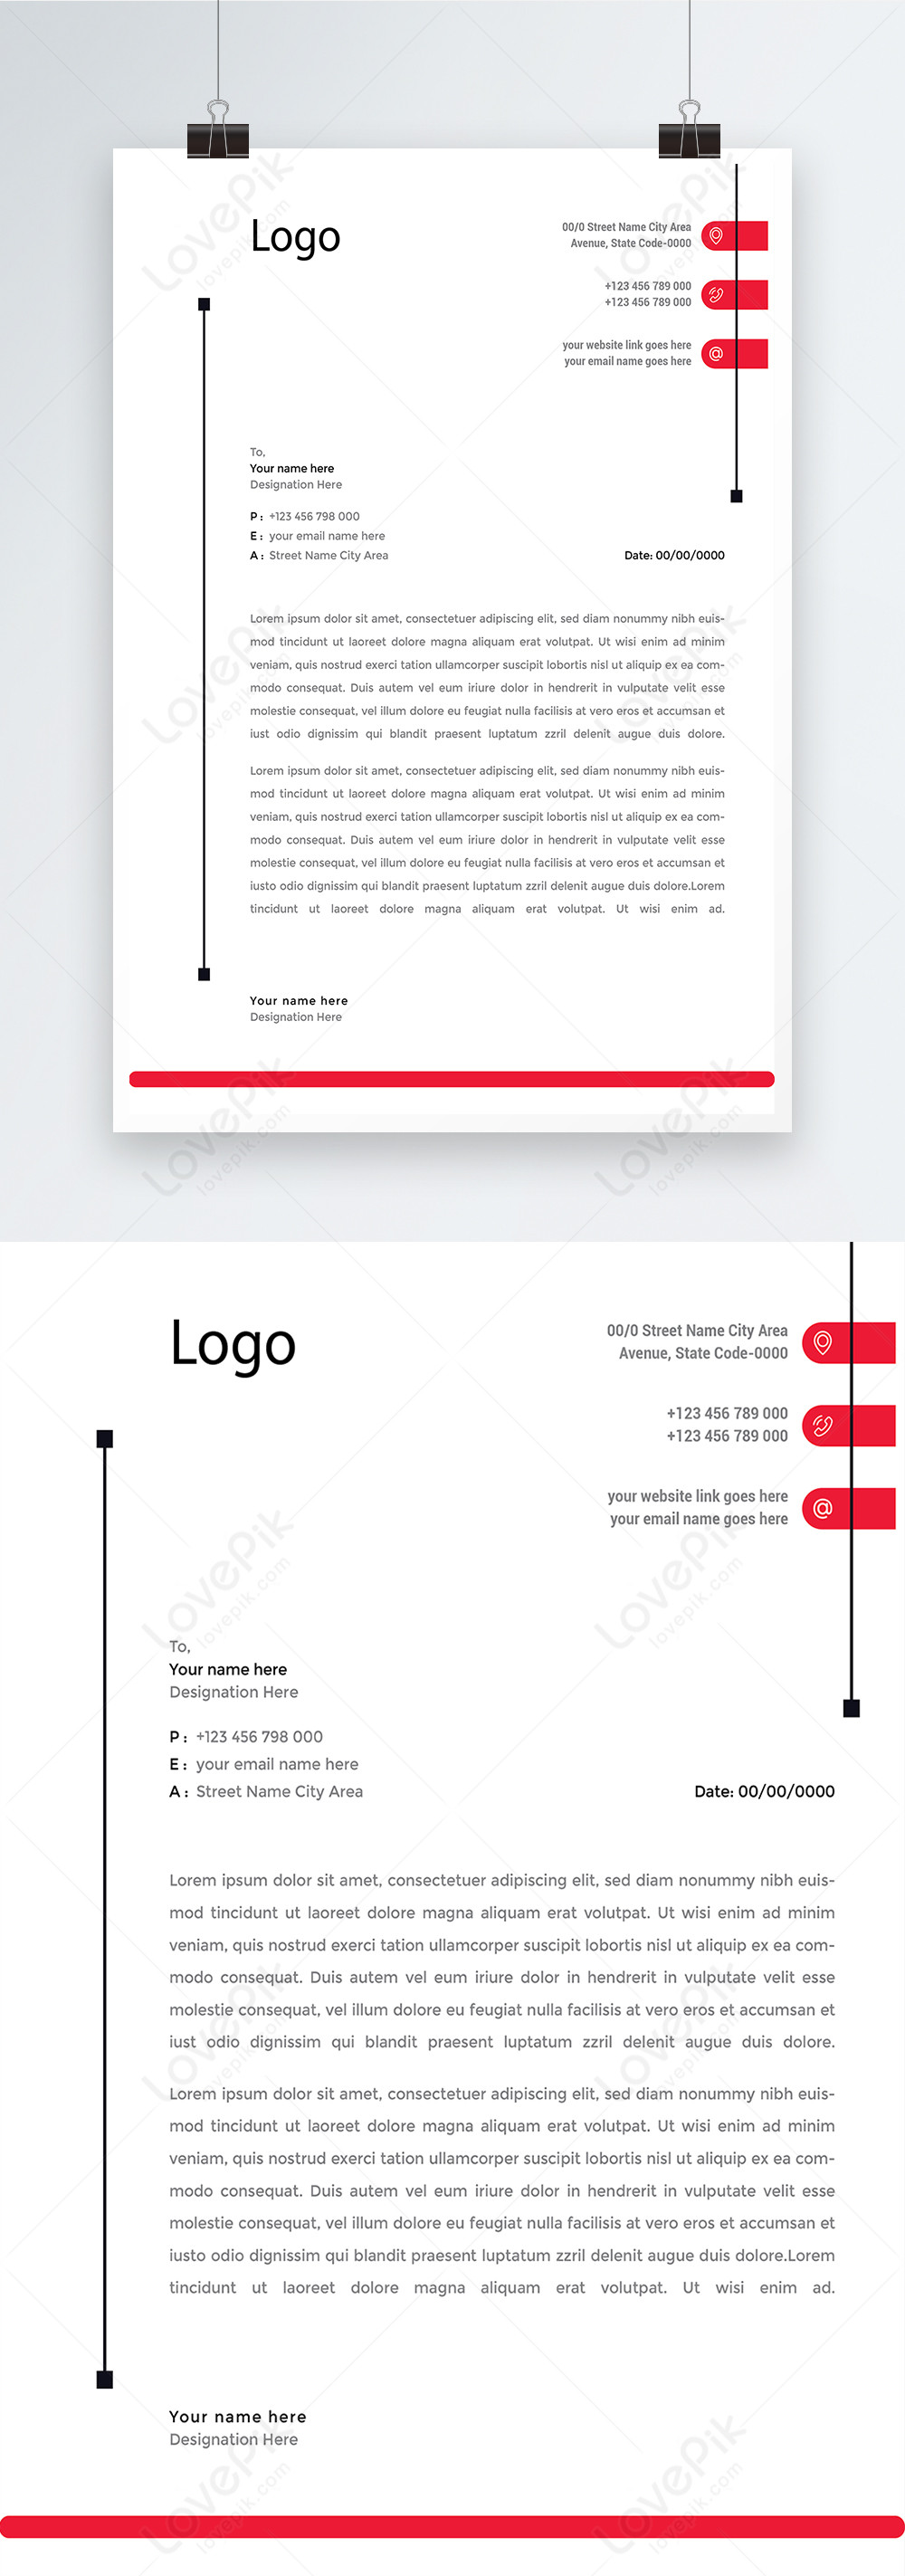 letterhead-template-design-template-image-picture-free-download-450187741-lovepik